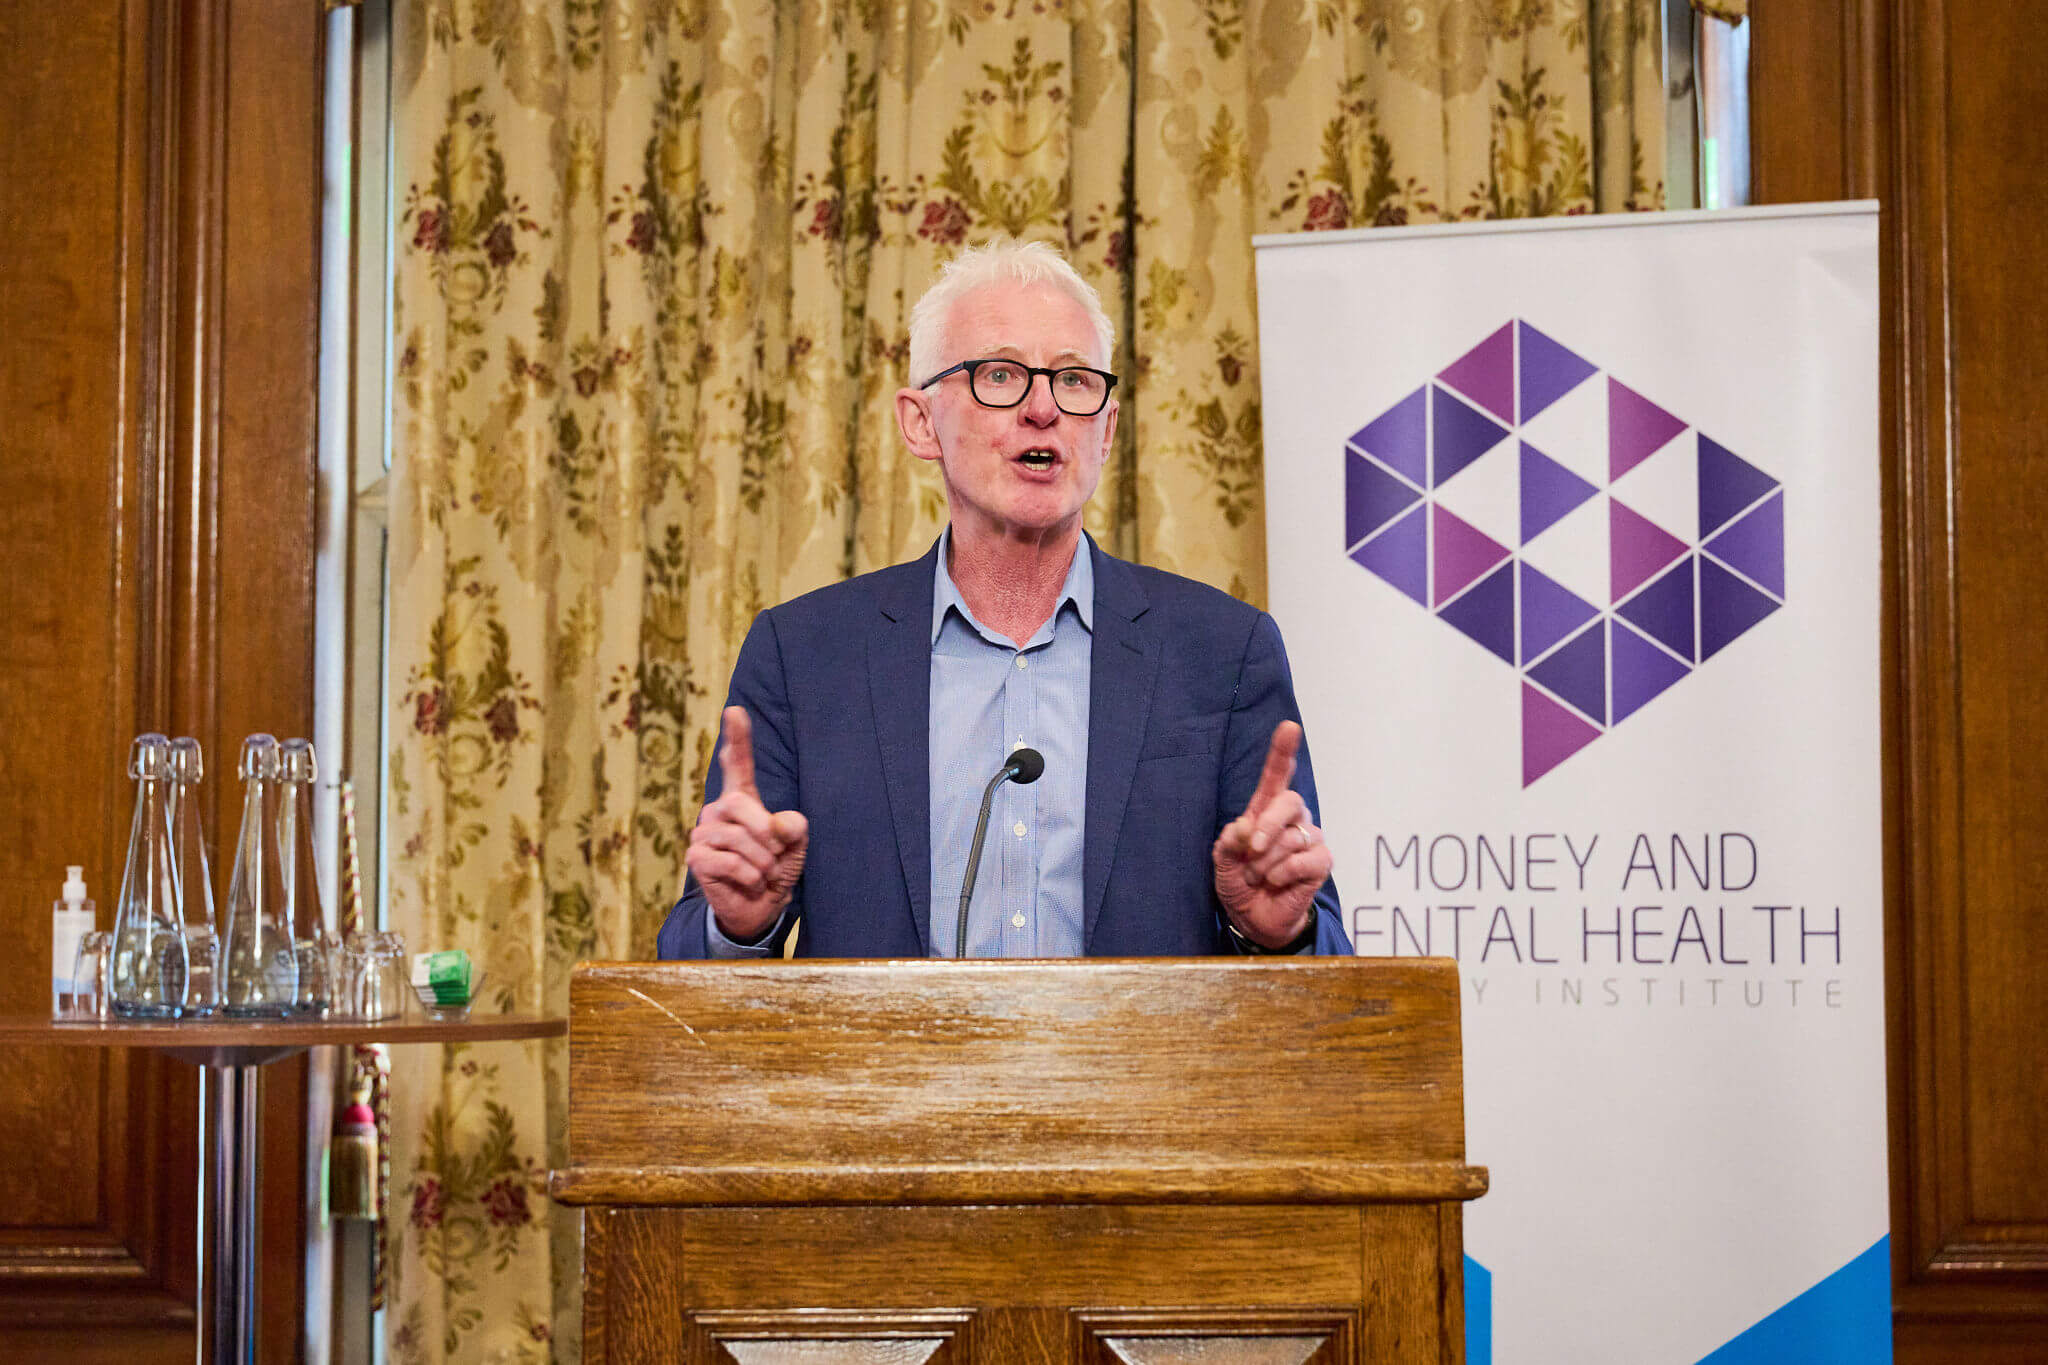 Sir Norman Lamb speaking at Money and Mental Health's Breaking the cycle launch event.